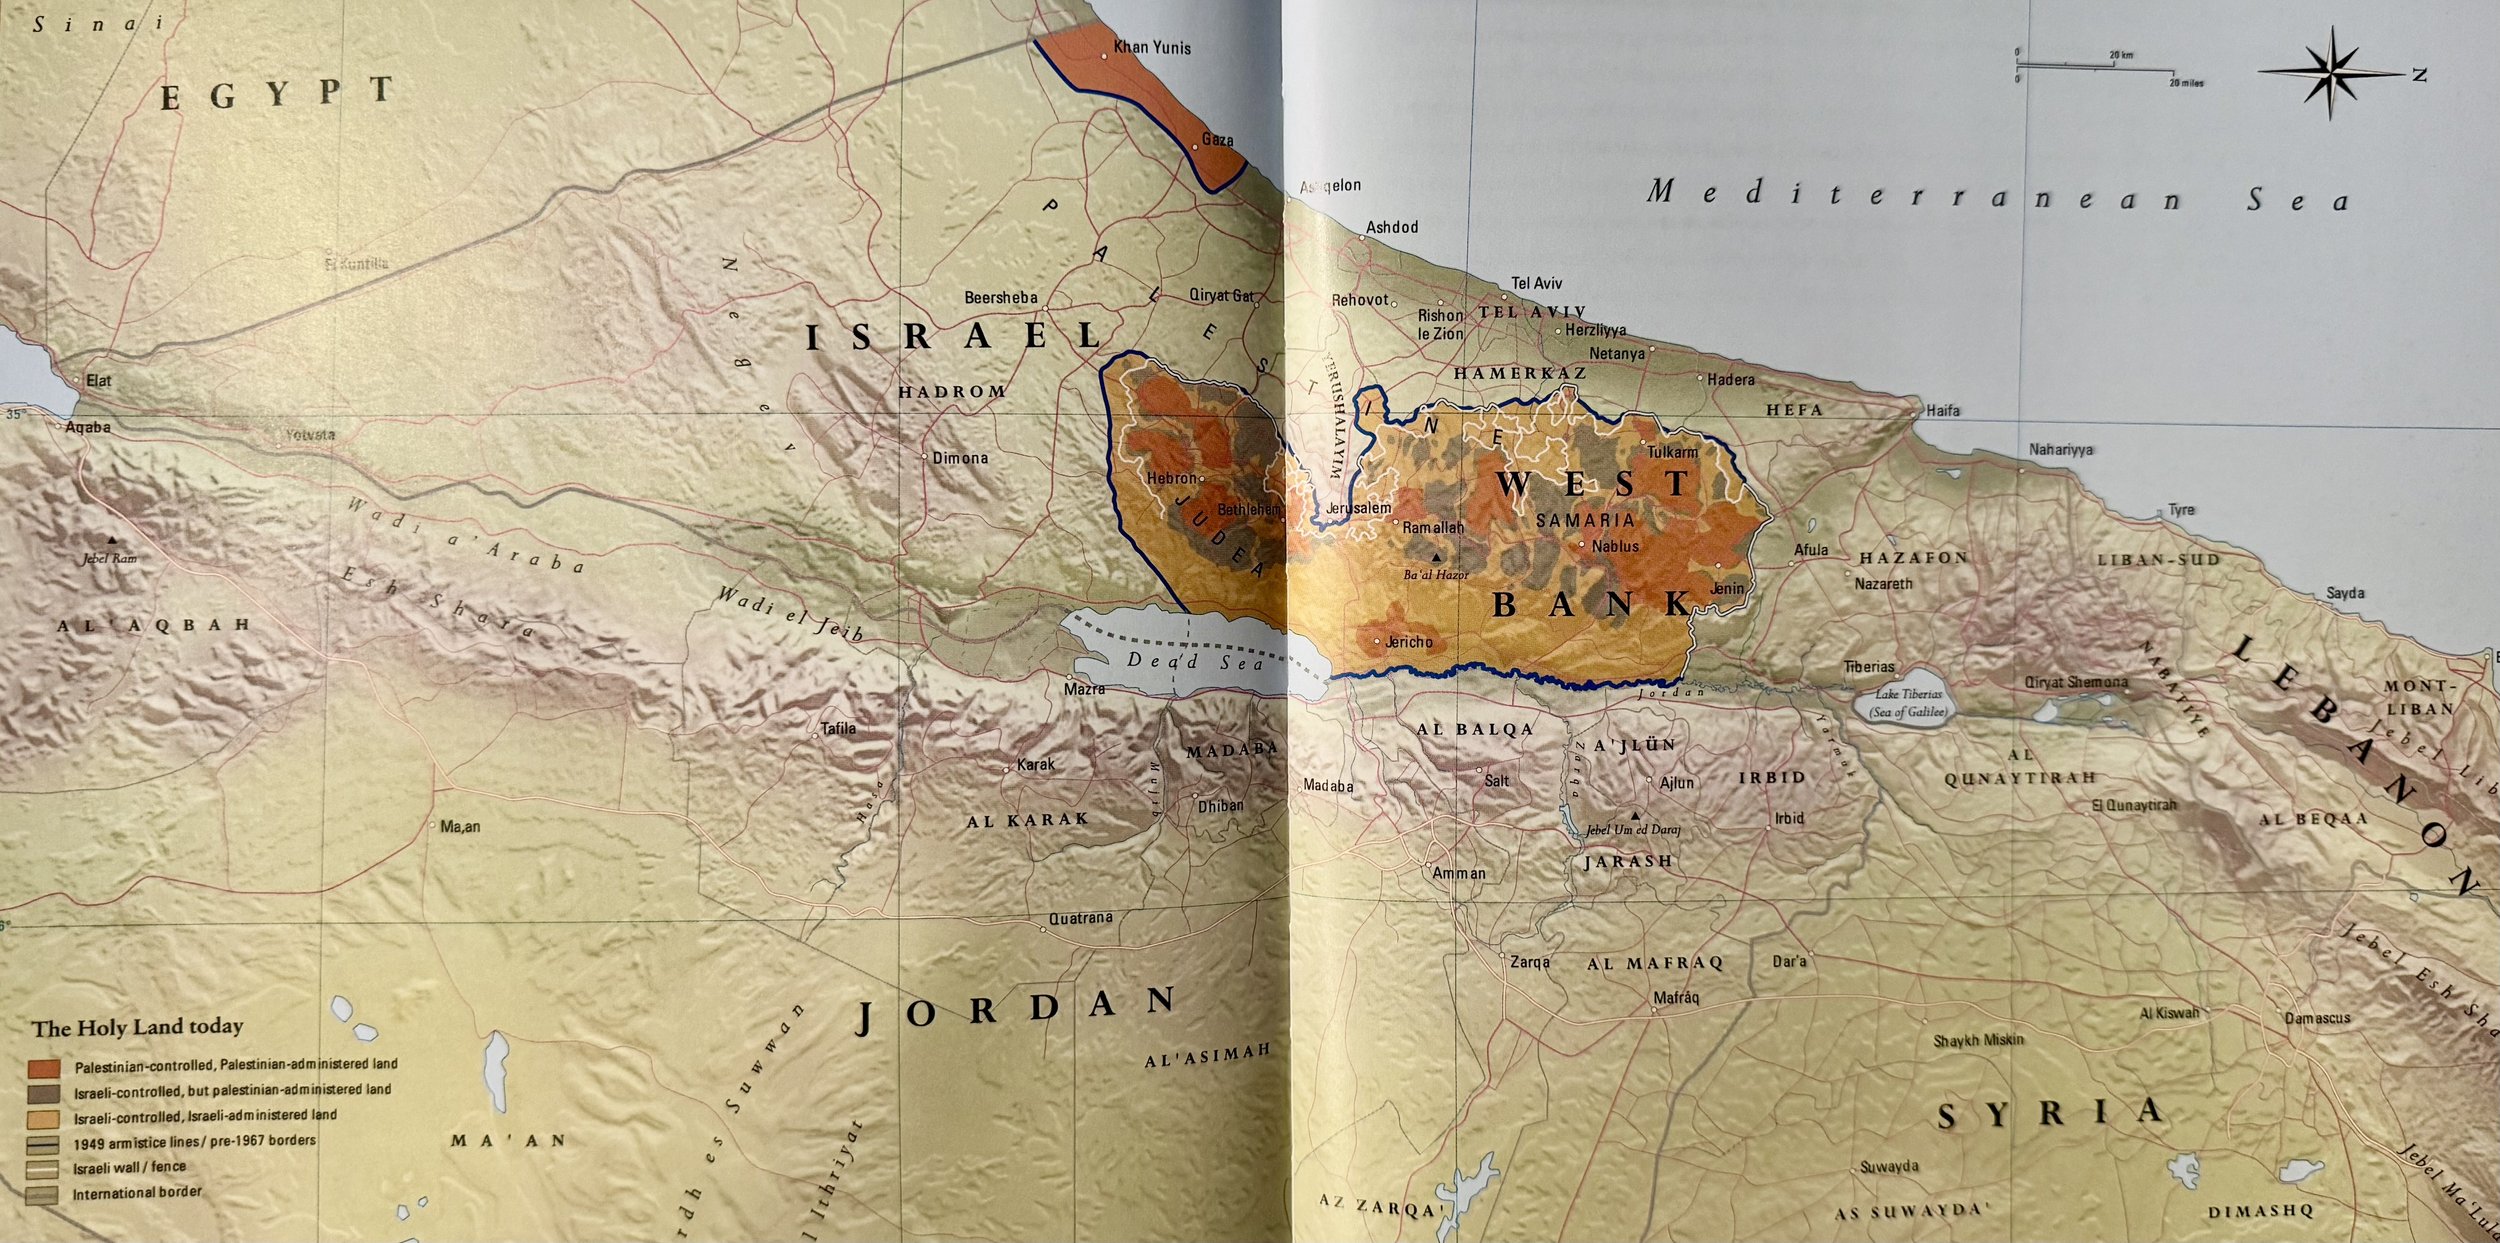 Holy Land Today Atlas of the Bible.jpeg